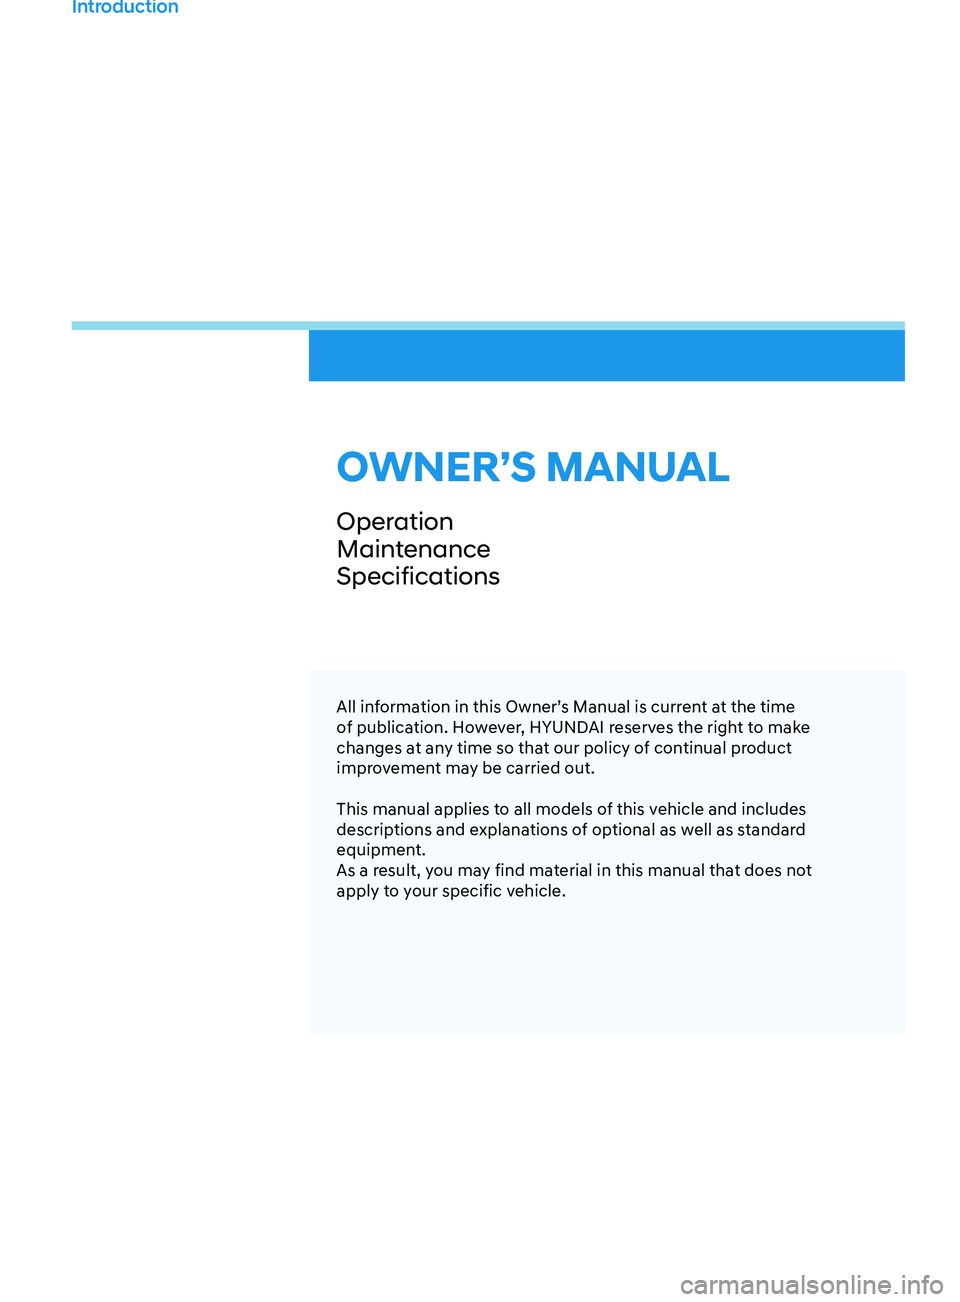 HYUNDAI SANTA FE 2021  Owners Manual All information in this Owner’s Manual is current at the time 
of publication. However, HYUNDAI reserves the right to make 
changes at any time so that our policy of continual product 
improvement m